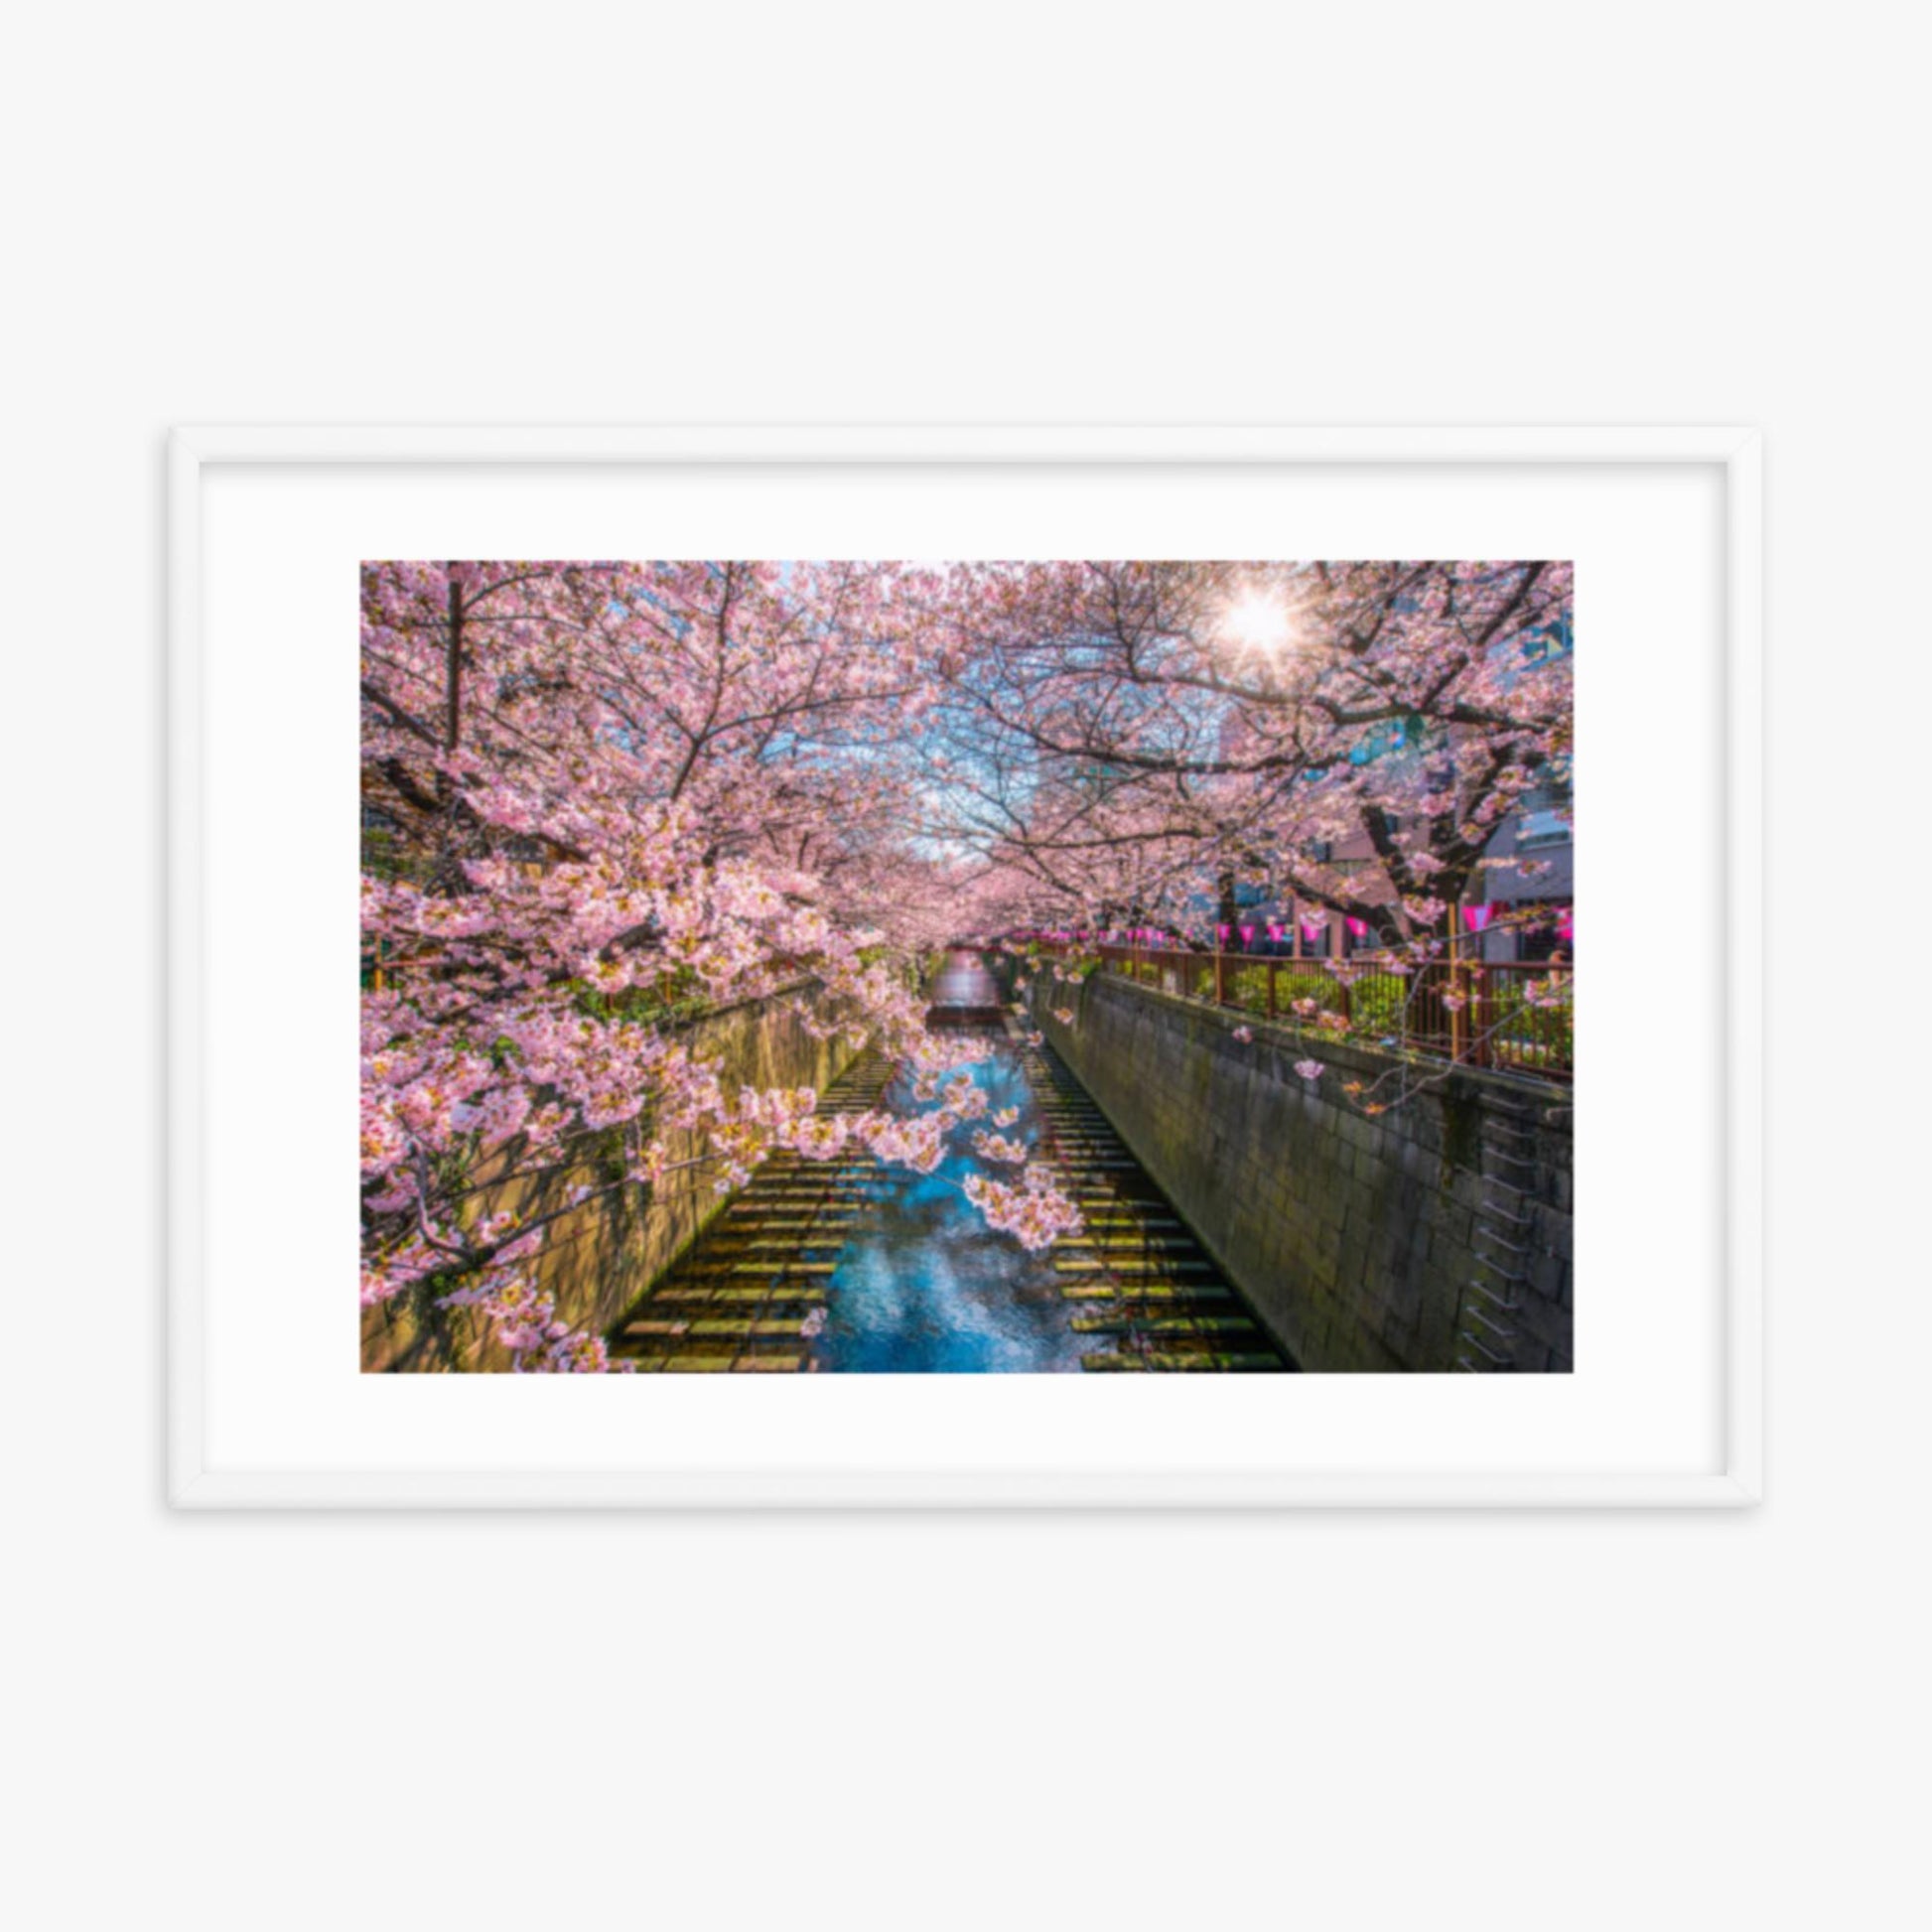 Cherry blossom sakura lined Meguro Canal in Tokyo 24x36 in Poster With White Frame